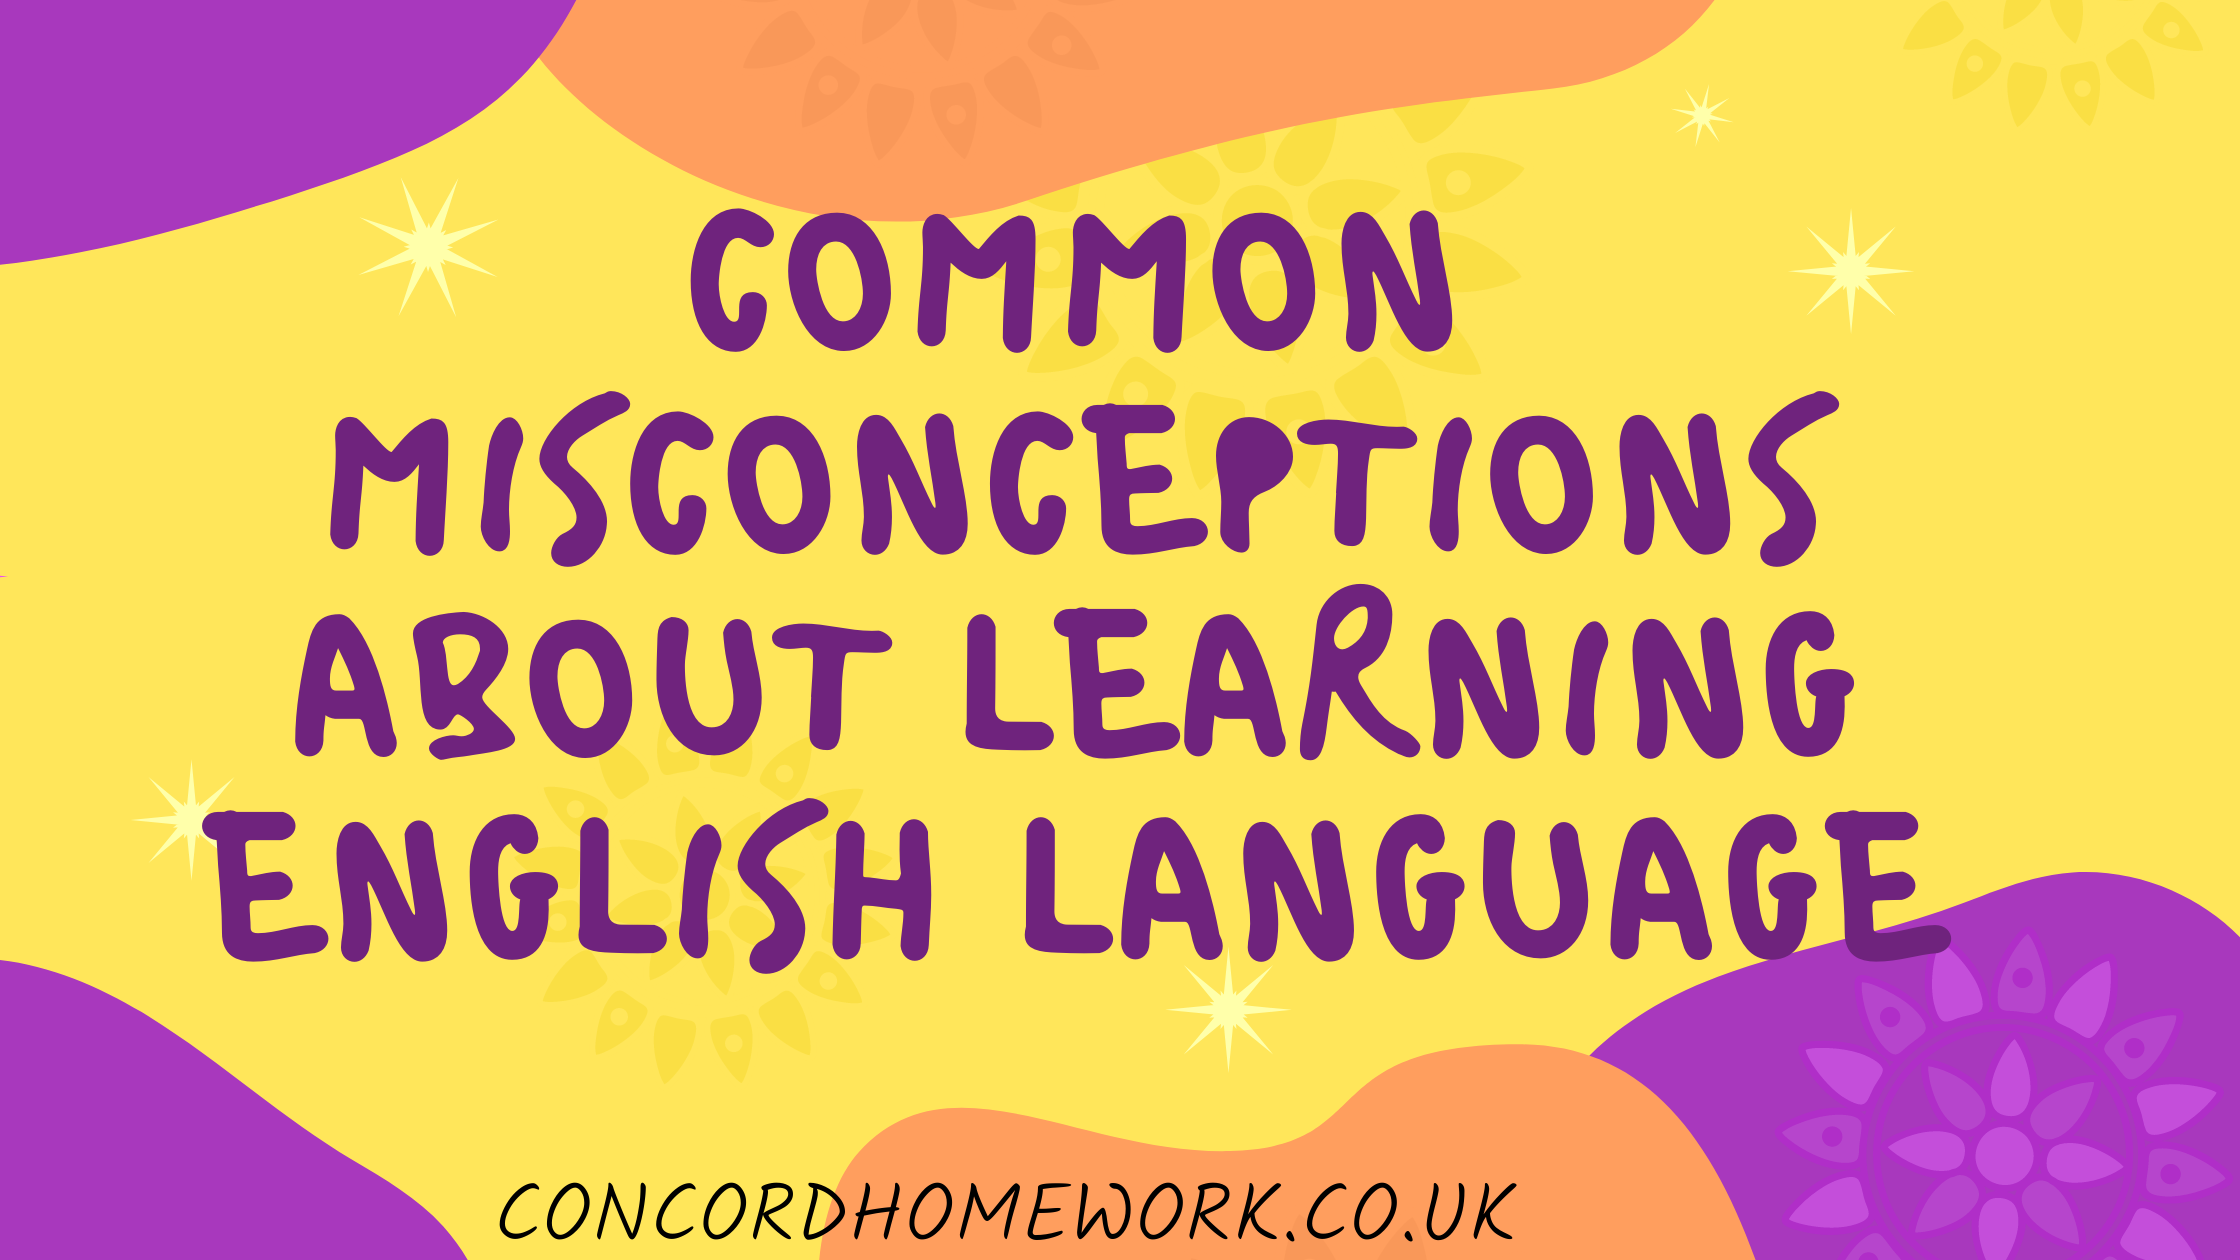 Common misconceptions about learning English language